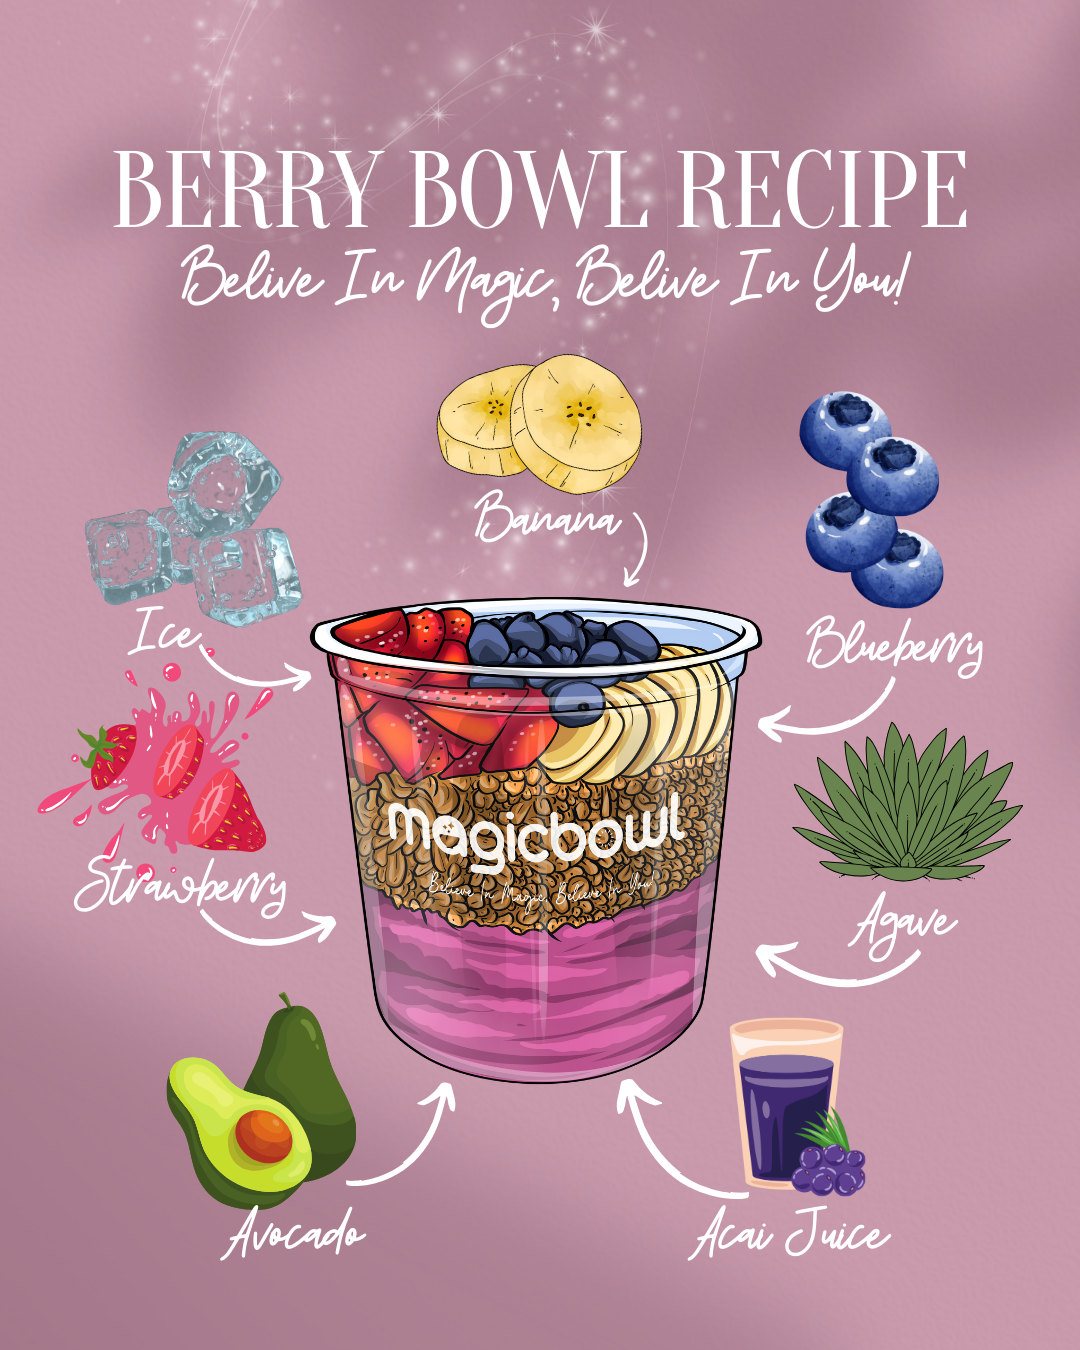 You are currently viewing Magic Acai Bowl Recipe: Berries, Agave, Avocado, and Bliss!